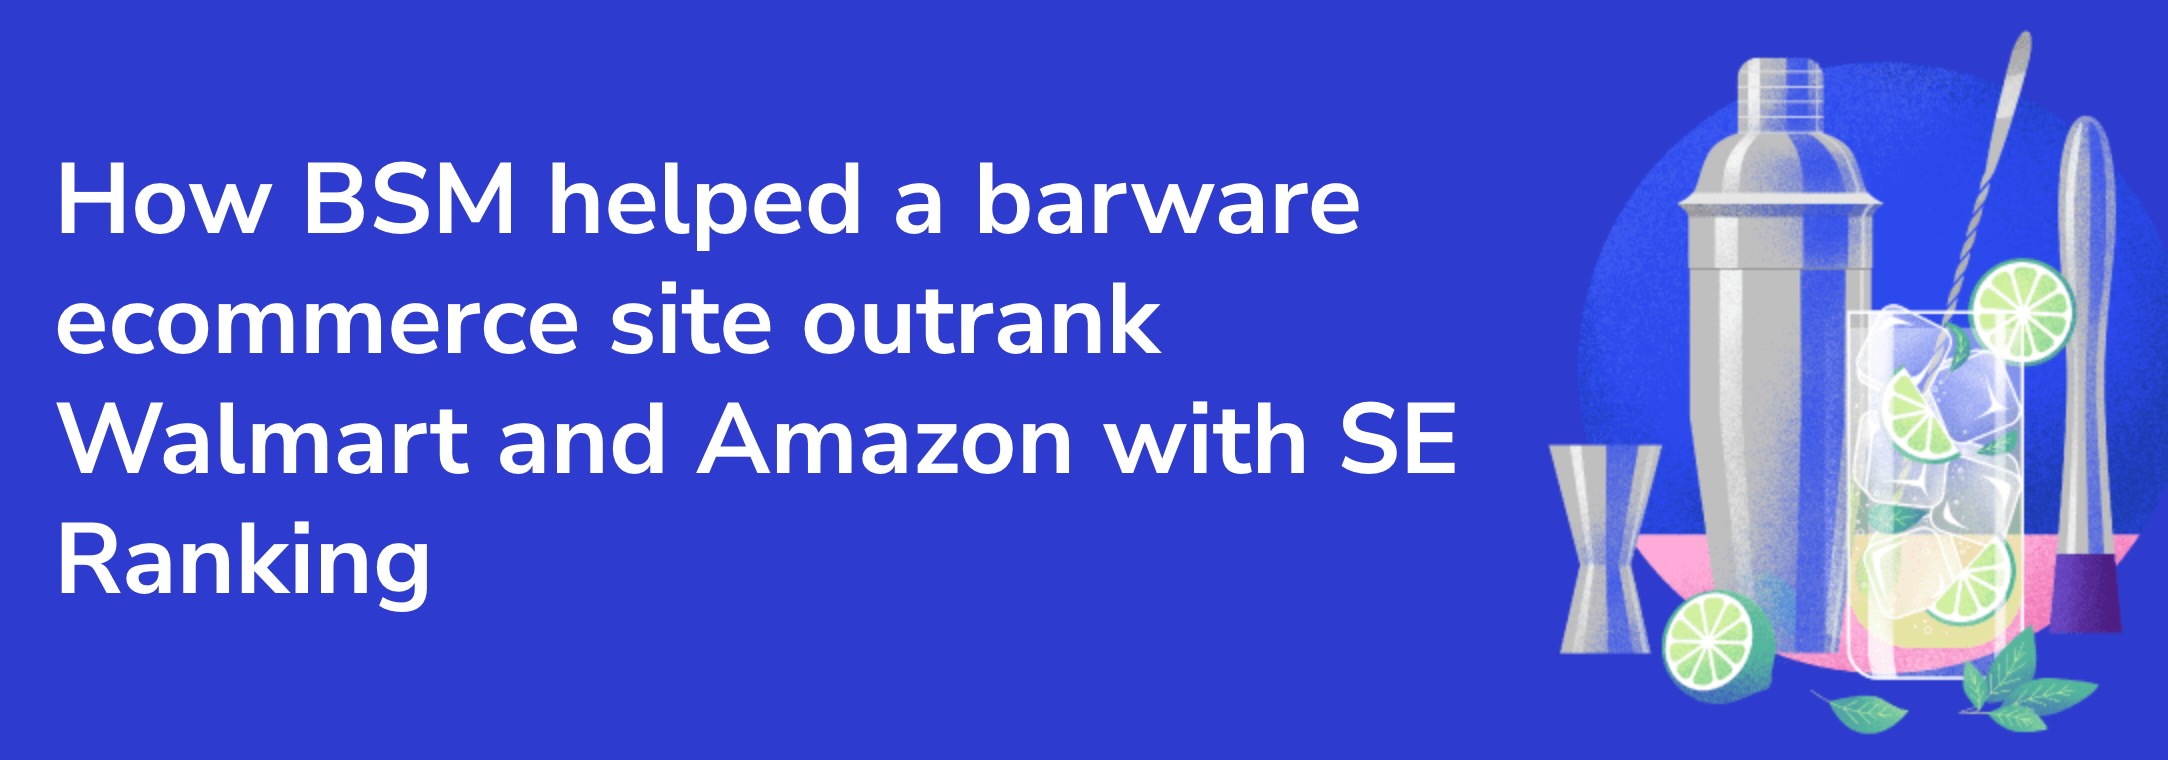 SE Ranking Unveils Another Compelling Case Study: How Boulder SEO Marketing Used Their Tools to Help an Ecommerce Client Outrank Amazon & Walmart